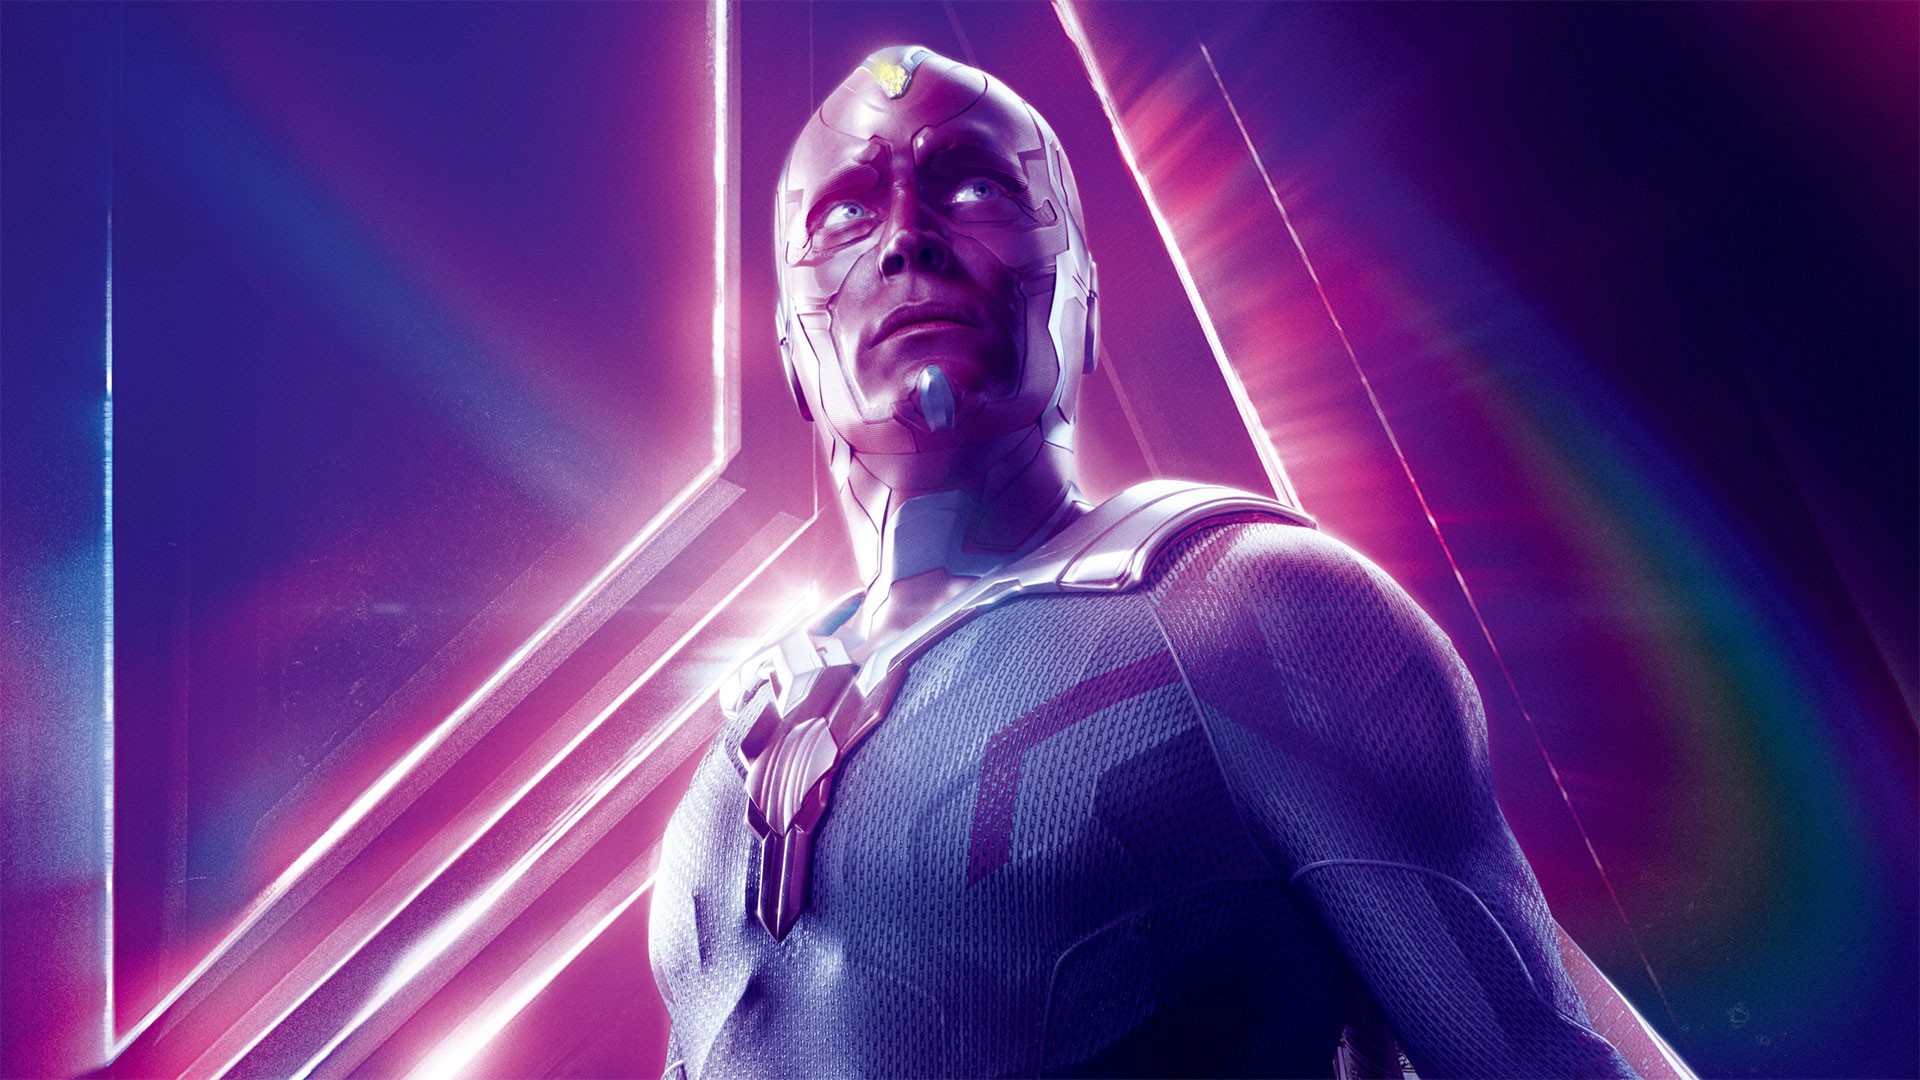 Paul Bettany Vision Avengers Endgame Wallpaper HD with high-resolution 1920x1080 pixel. You can use this poster wallpaper for your Desktop Computers, Mac Screensavers, Windows Backgrounds, iPhone Wallpapers, Tablet or Android Lock screen and another Mobile device